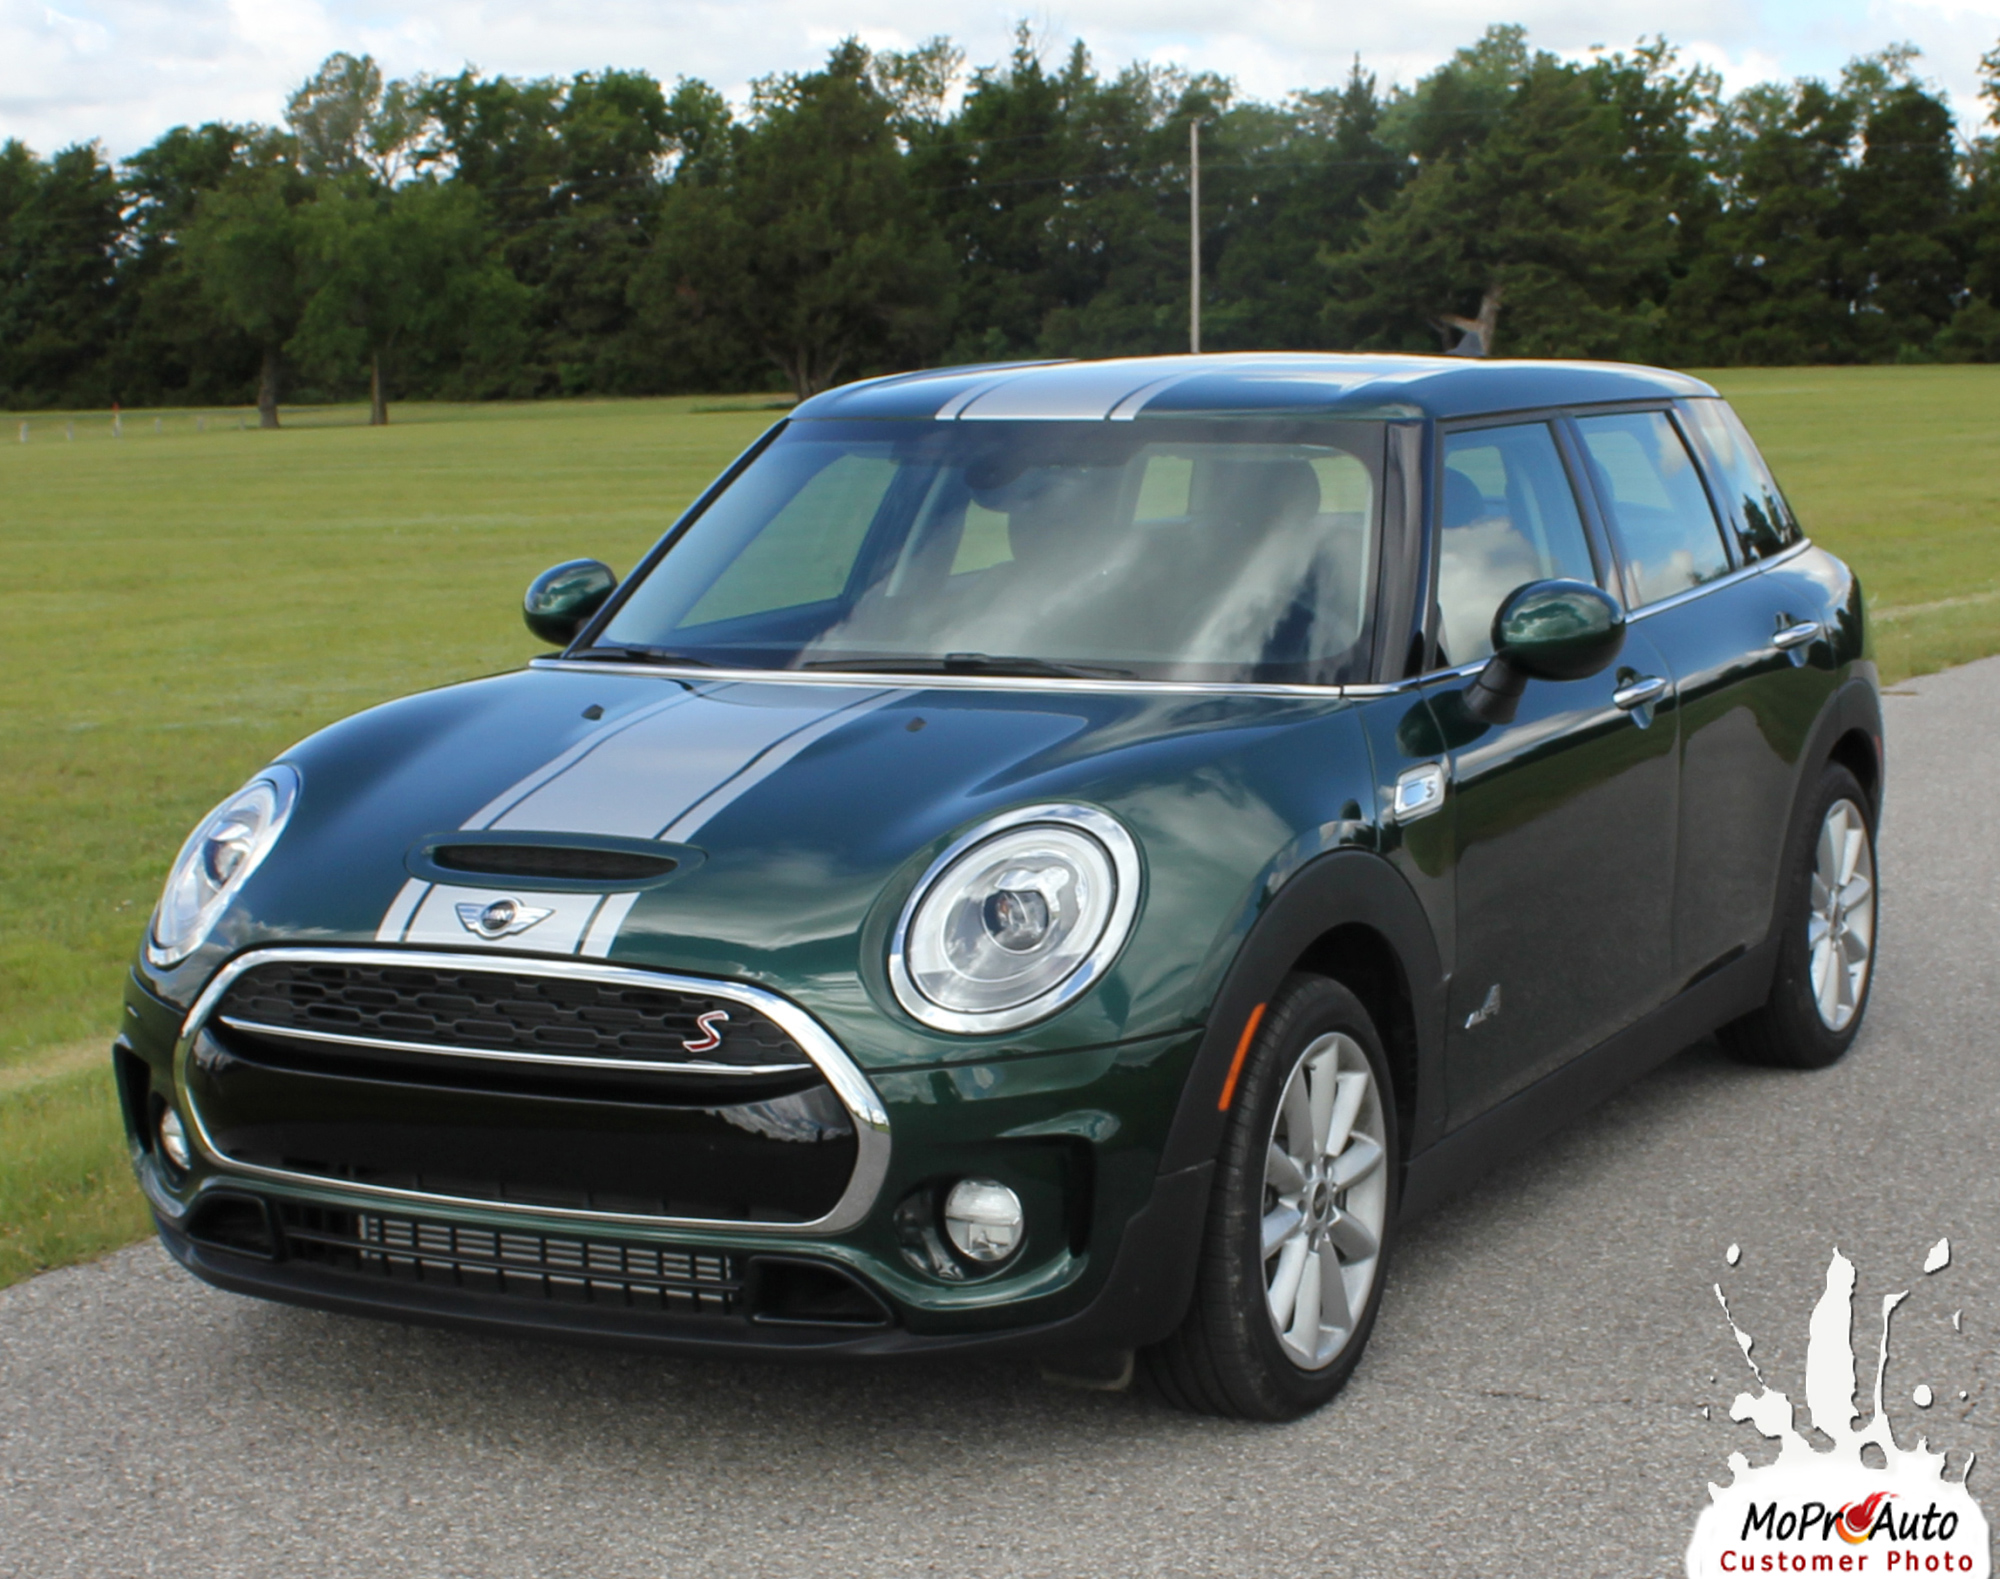 Mini Cooper CLUBMAN S-TYPE HOOD CENTER STRIPES Vinyl Graphics Stripes and Decals Kit